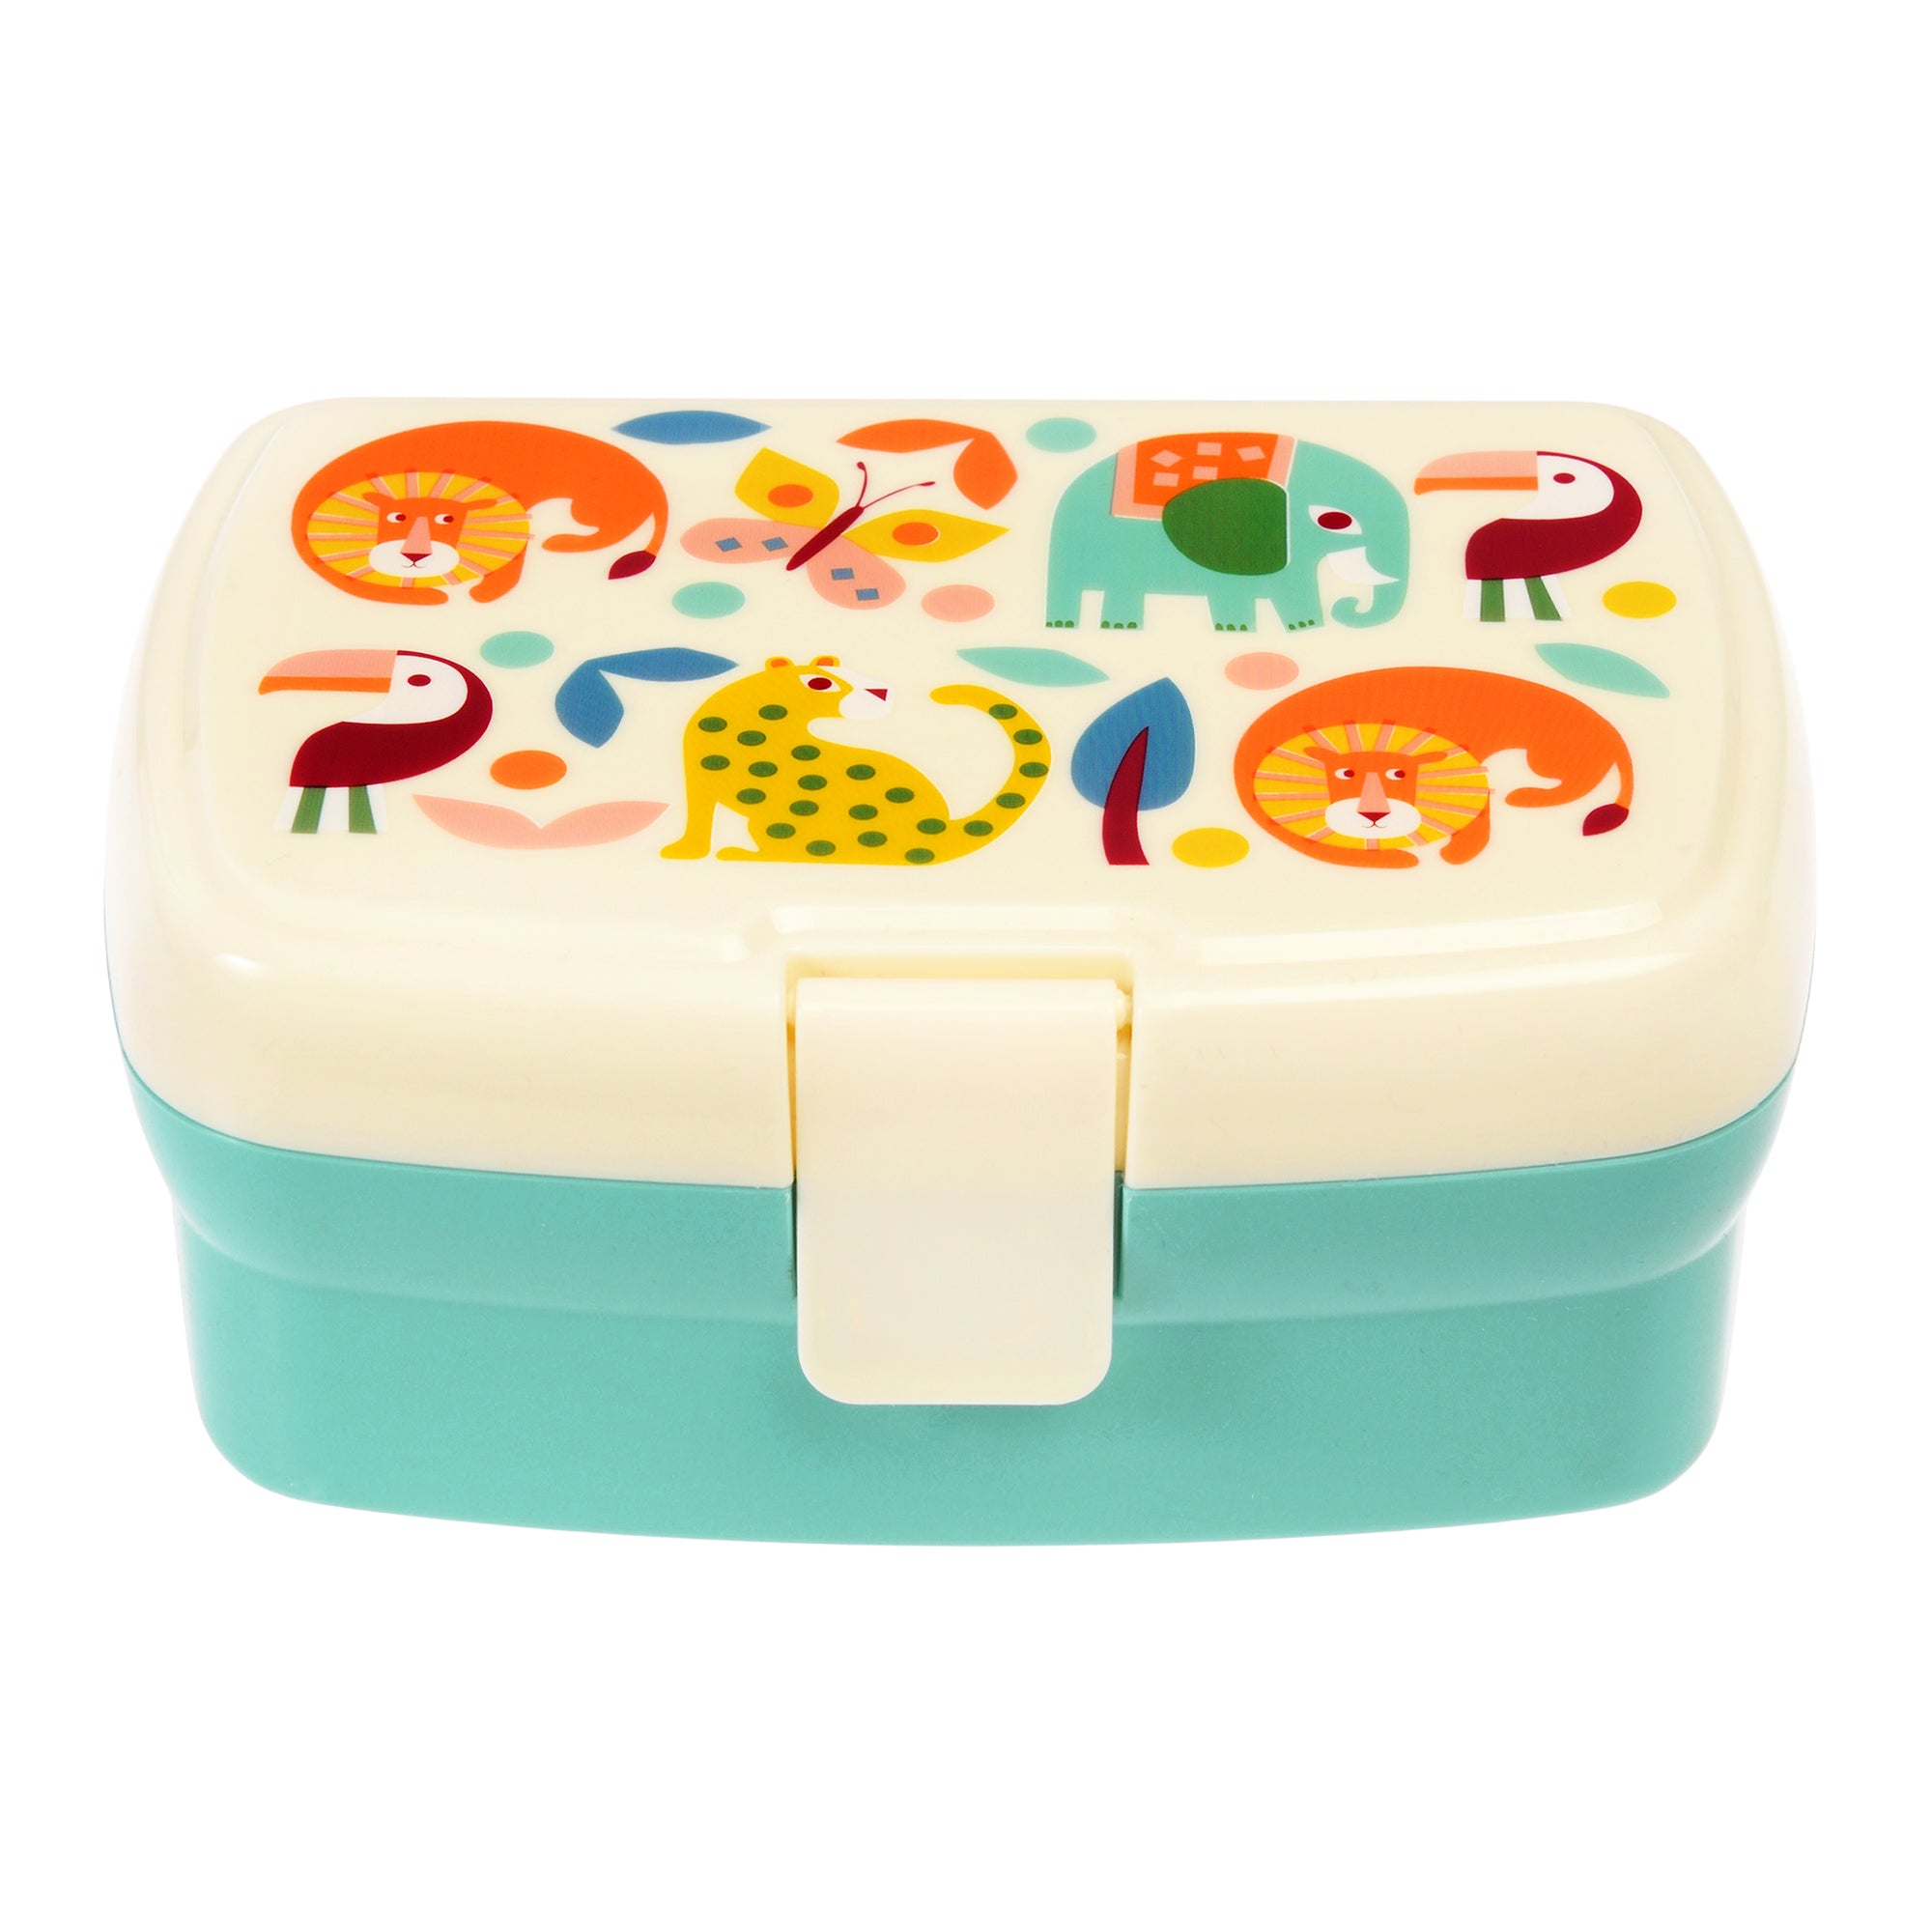 Rex box with tray - Wild wonders-Lunch Boxes & Totes-Little Fish Co.